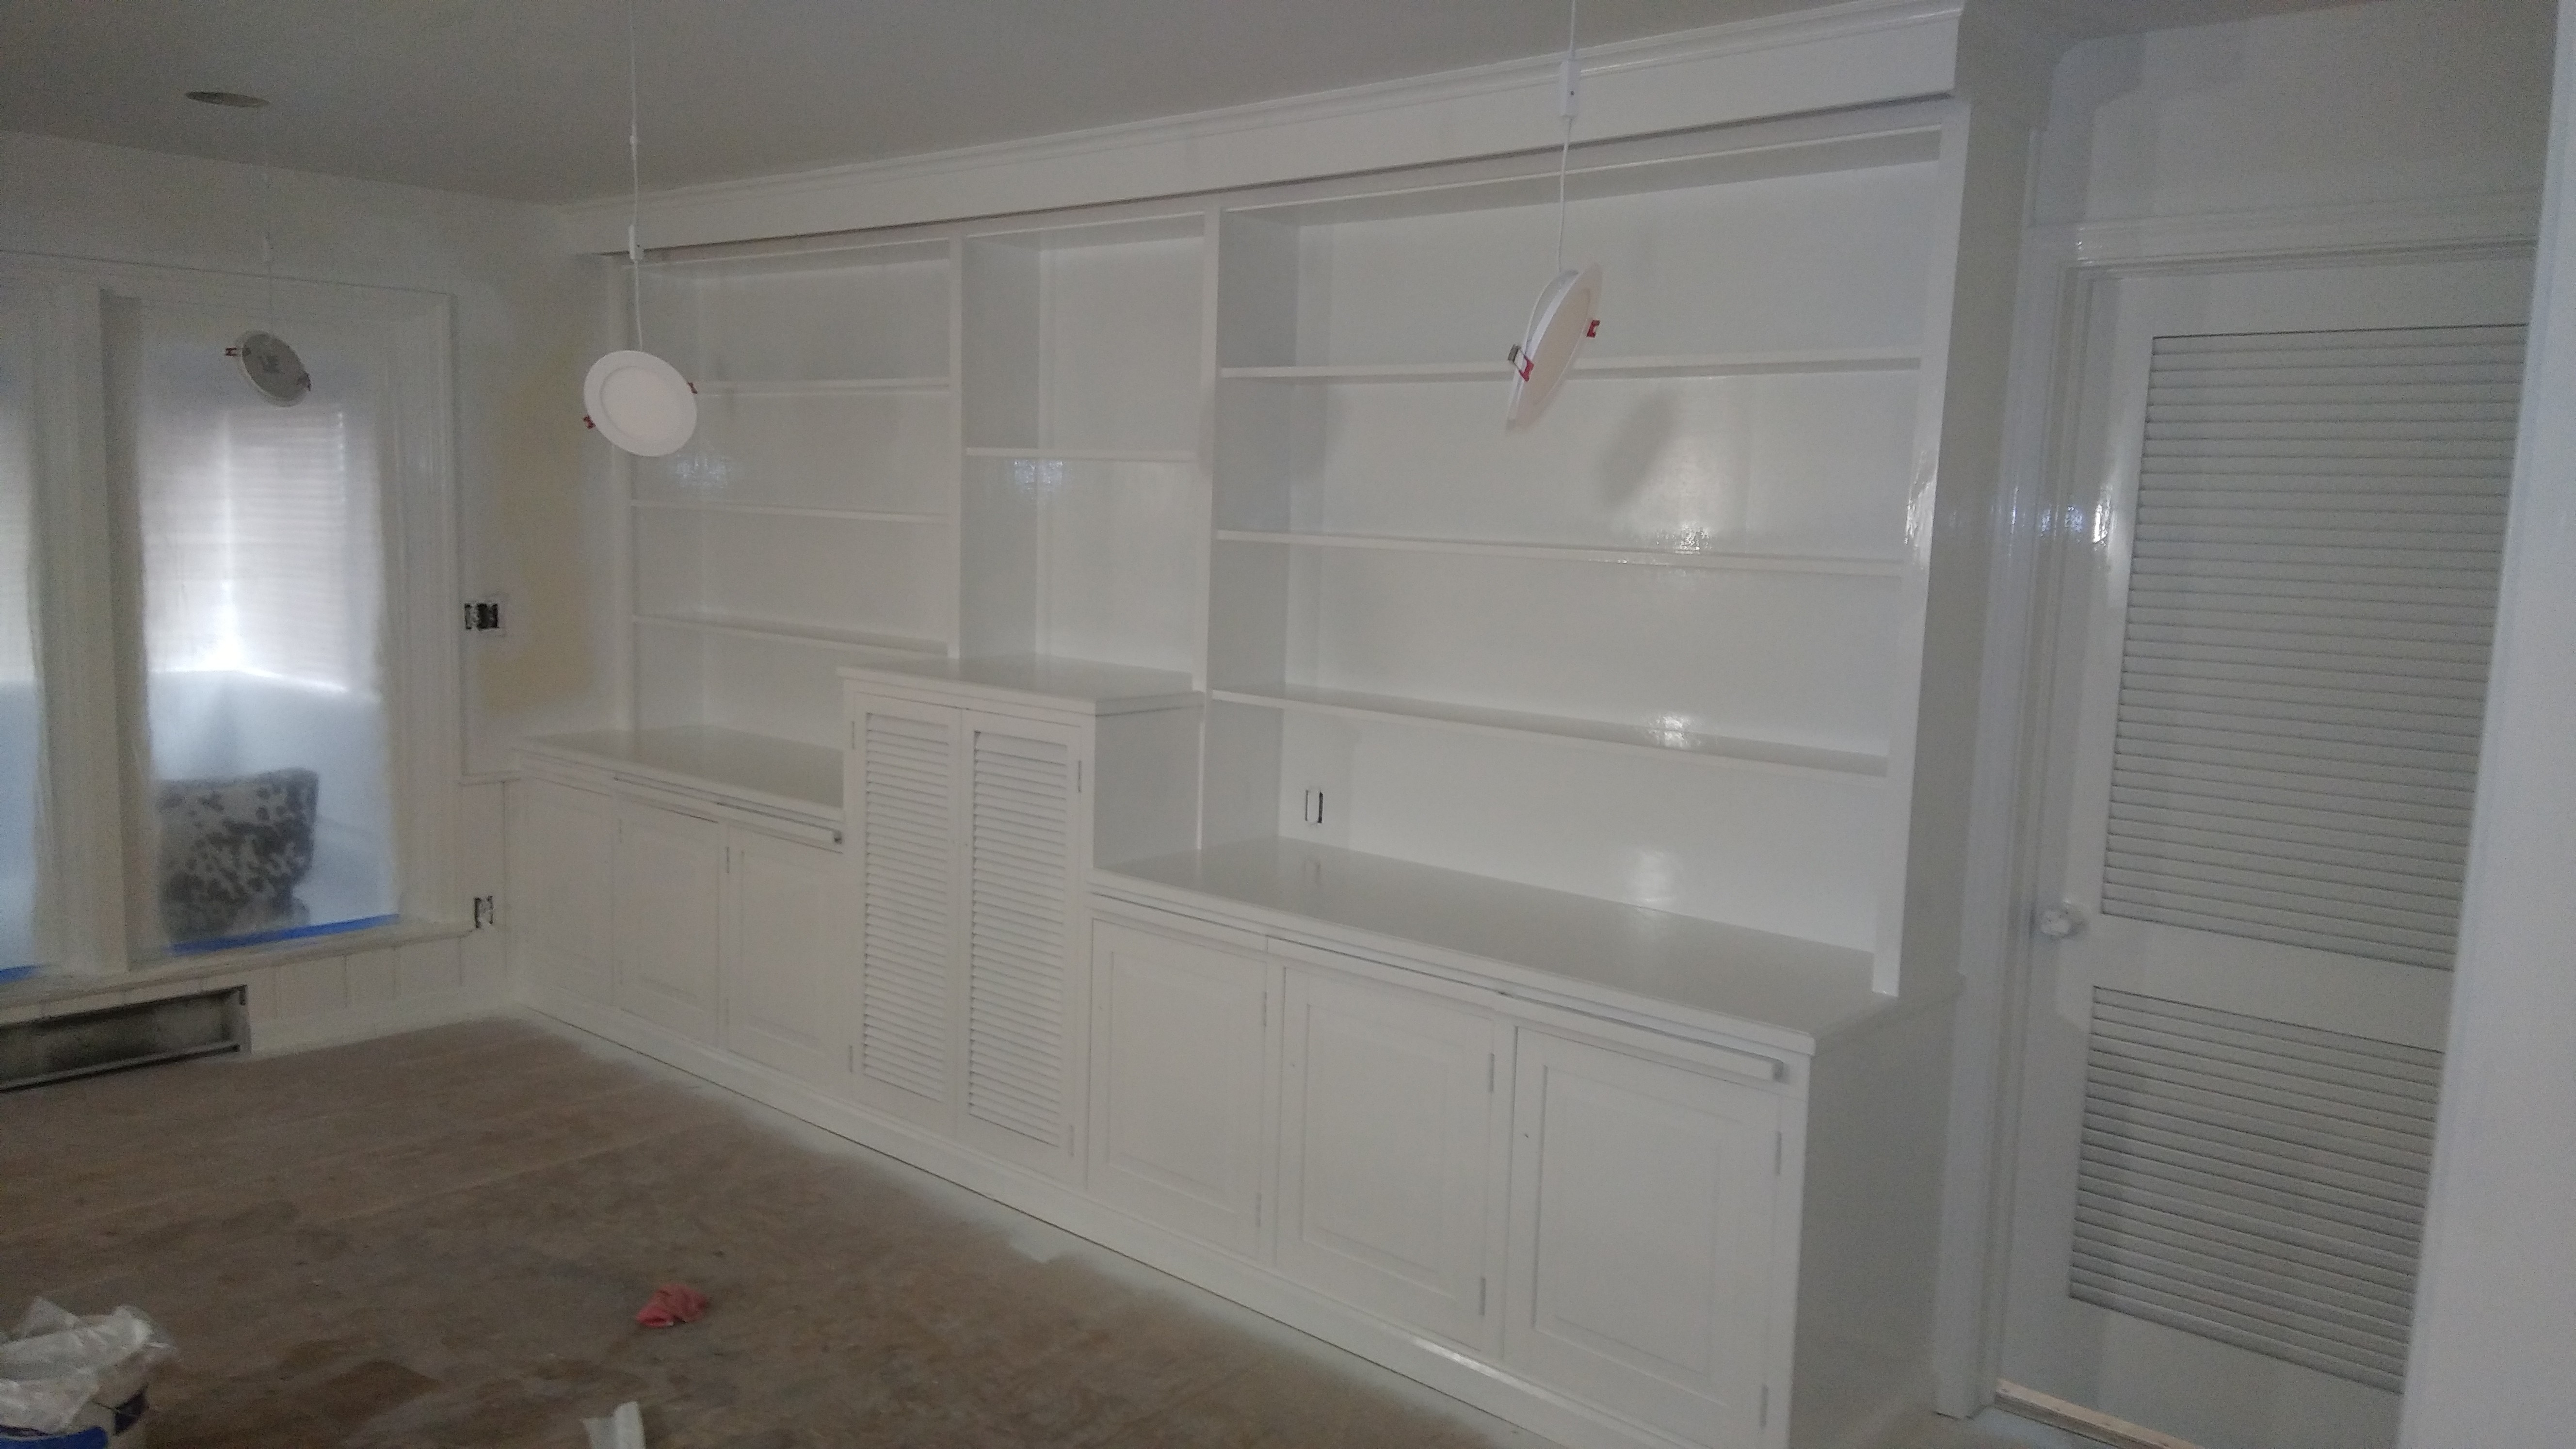 Kitchen and Cabinet Refinishing for Roman Painting in Windham, Ohio